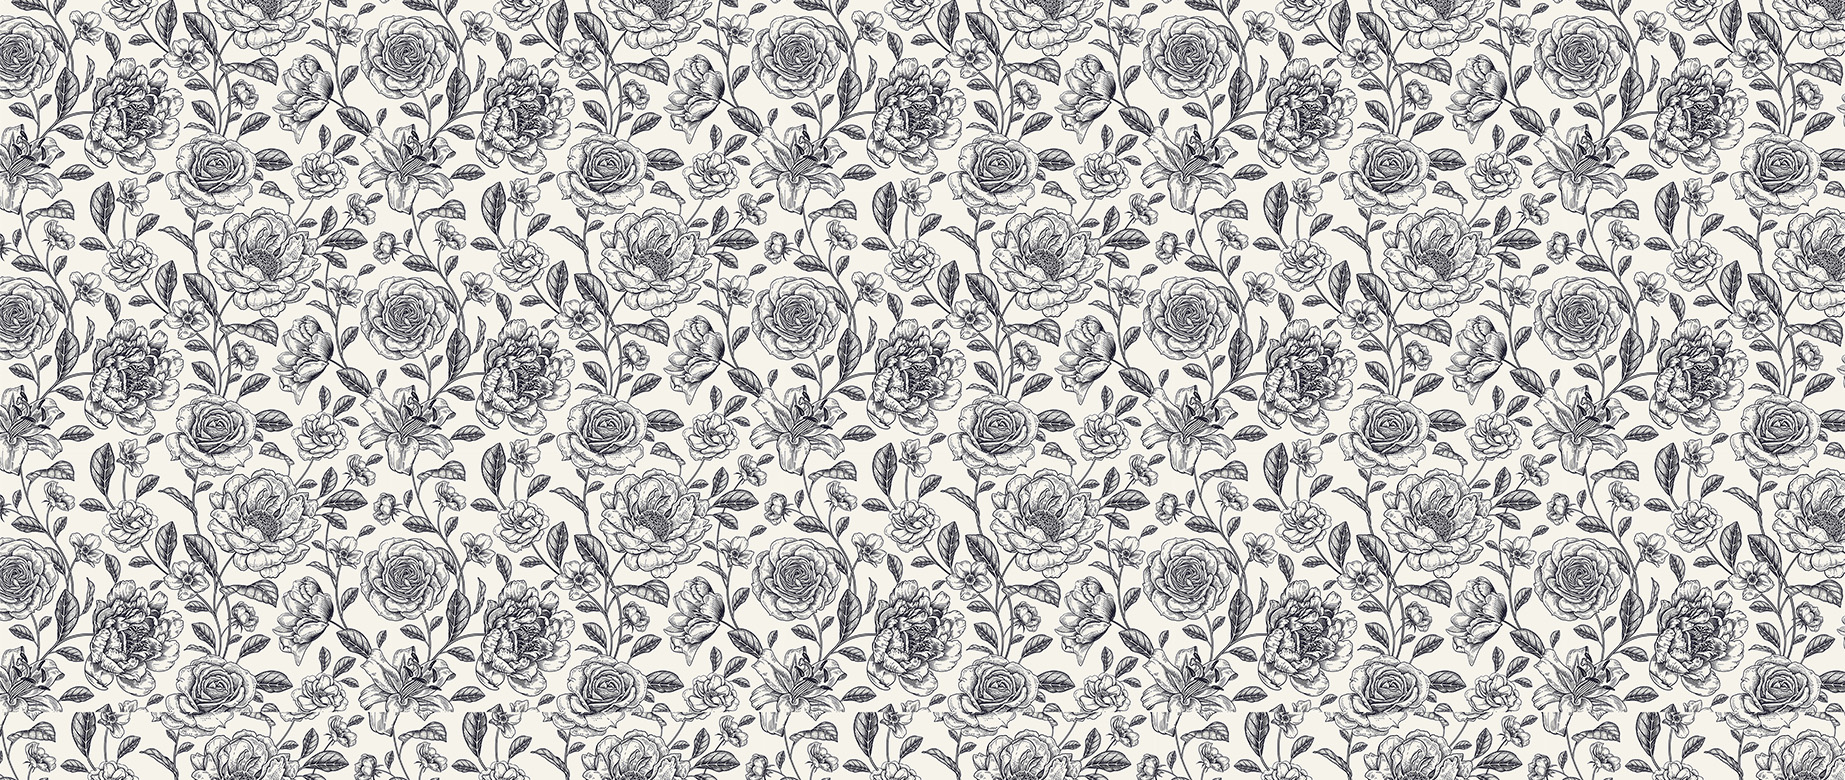 pencil-sketch-of-roses-and-peonies-wallpapers-full-wide-view